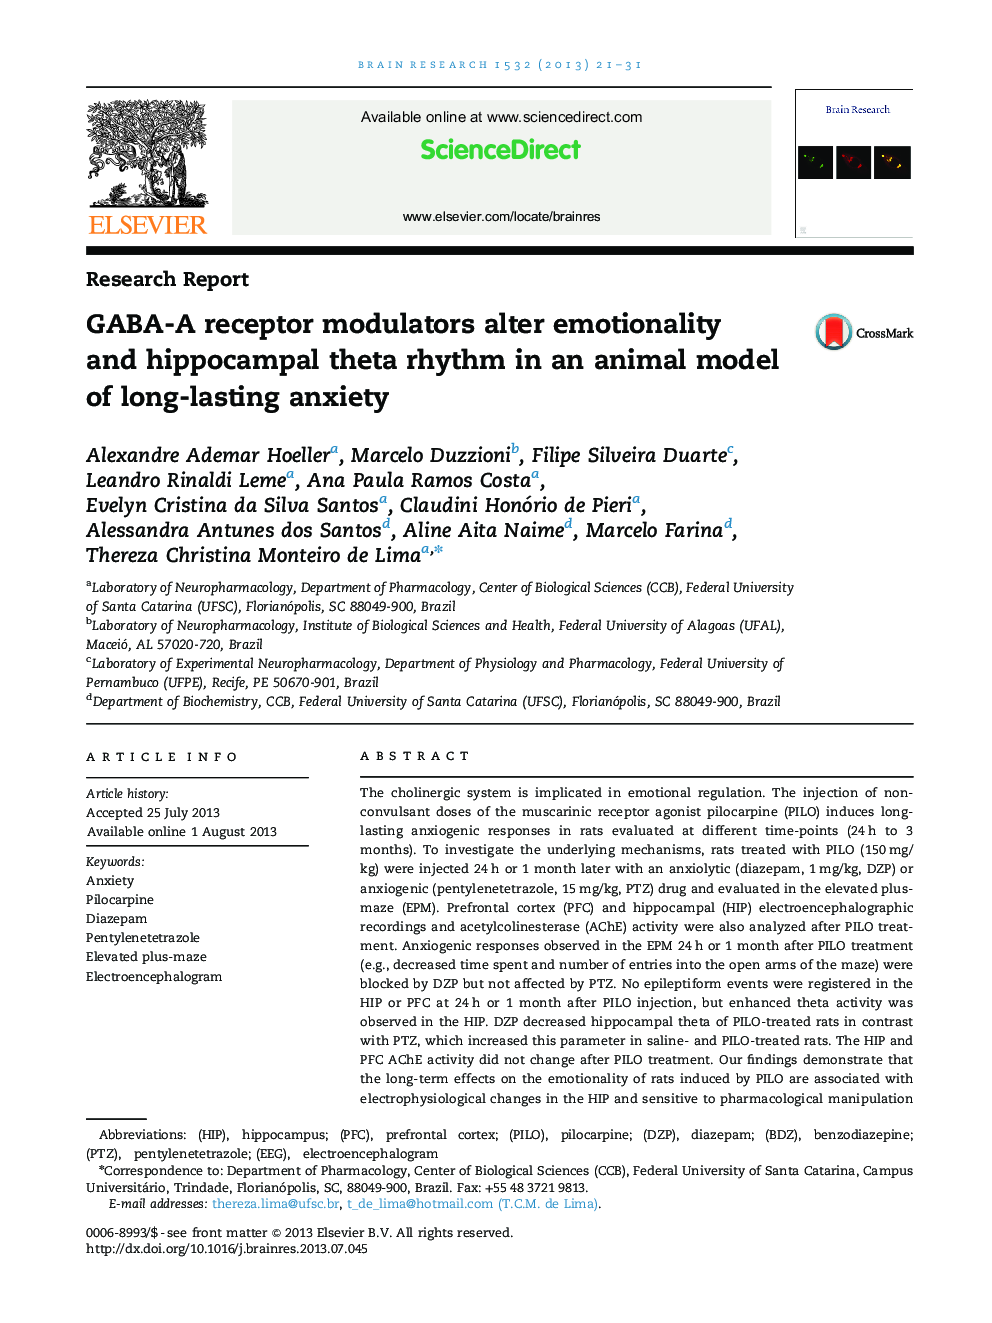 Research ReportGABA-A receptor modulators alter emotionality and hippocampal theta rhythm in an animal model of long-lasting anxiety